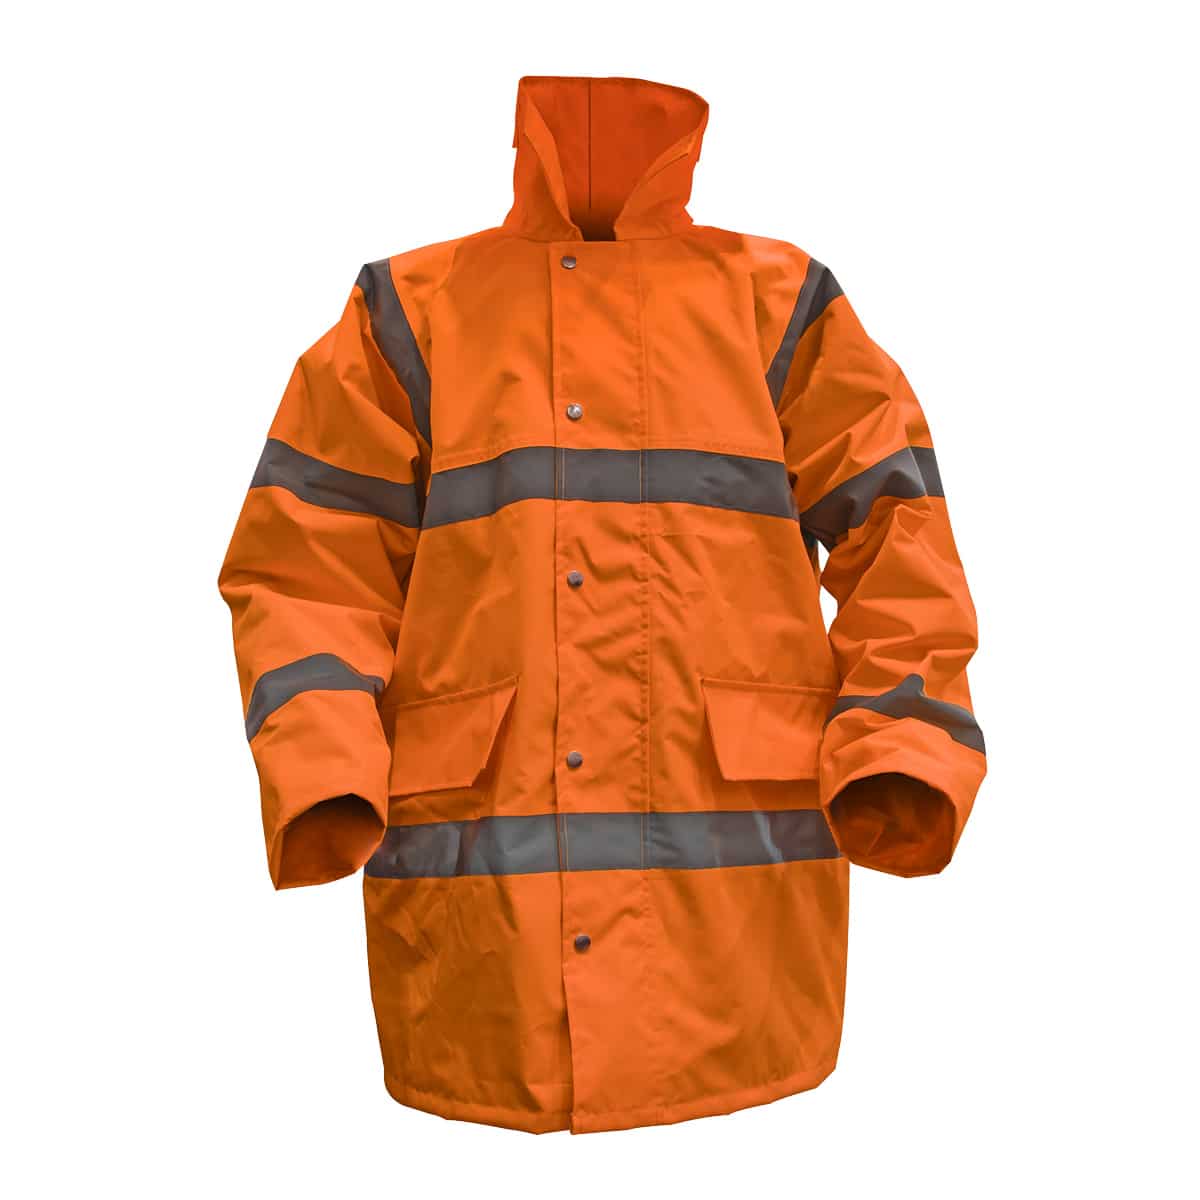 Hi-Vis Orange Motorway Jacket with Quilted Lining - XX-Large - Triace